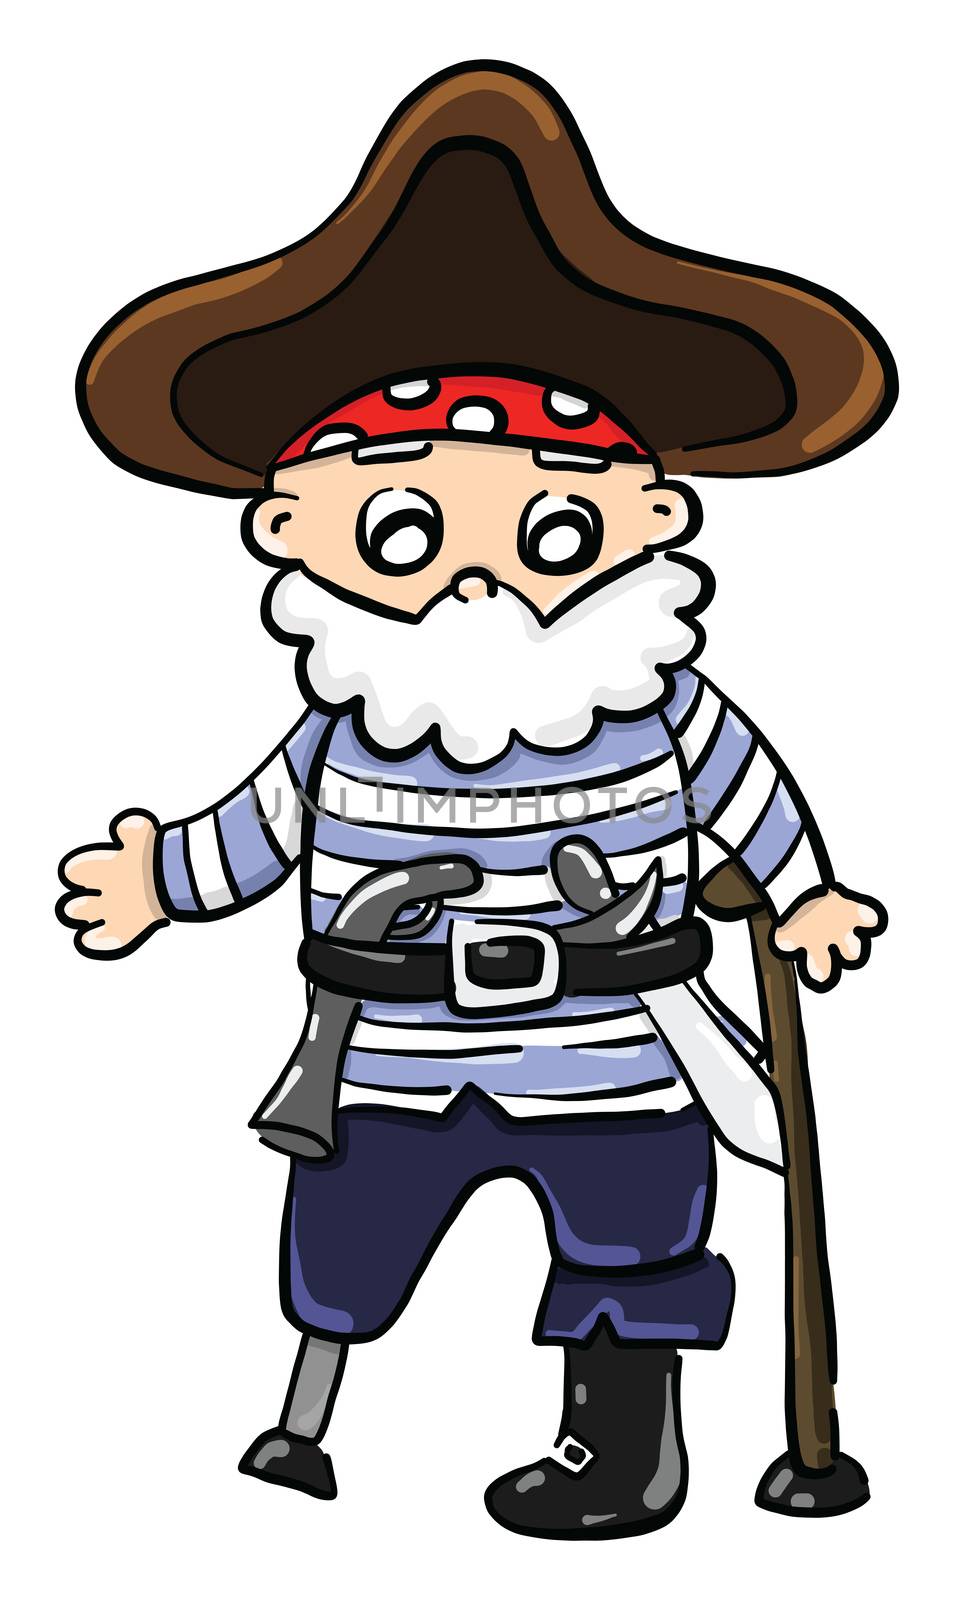 Old pirate man , illustration, vector on white background